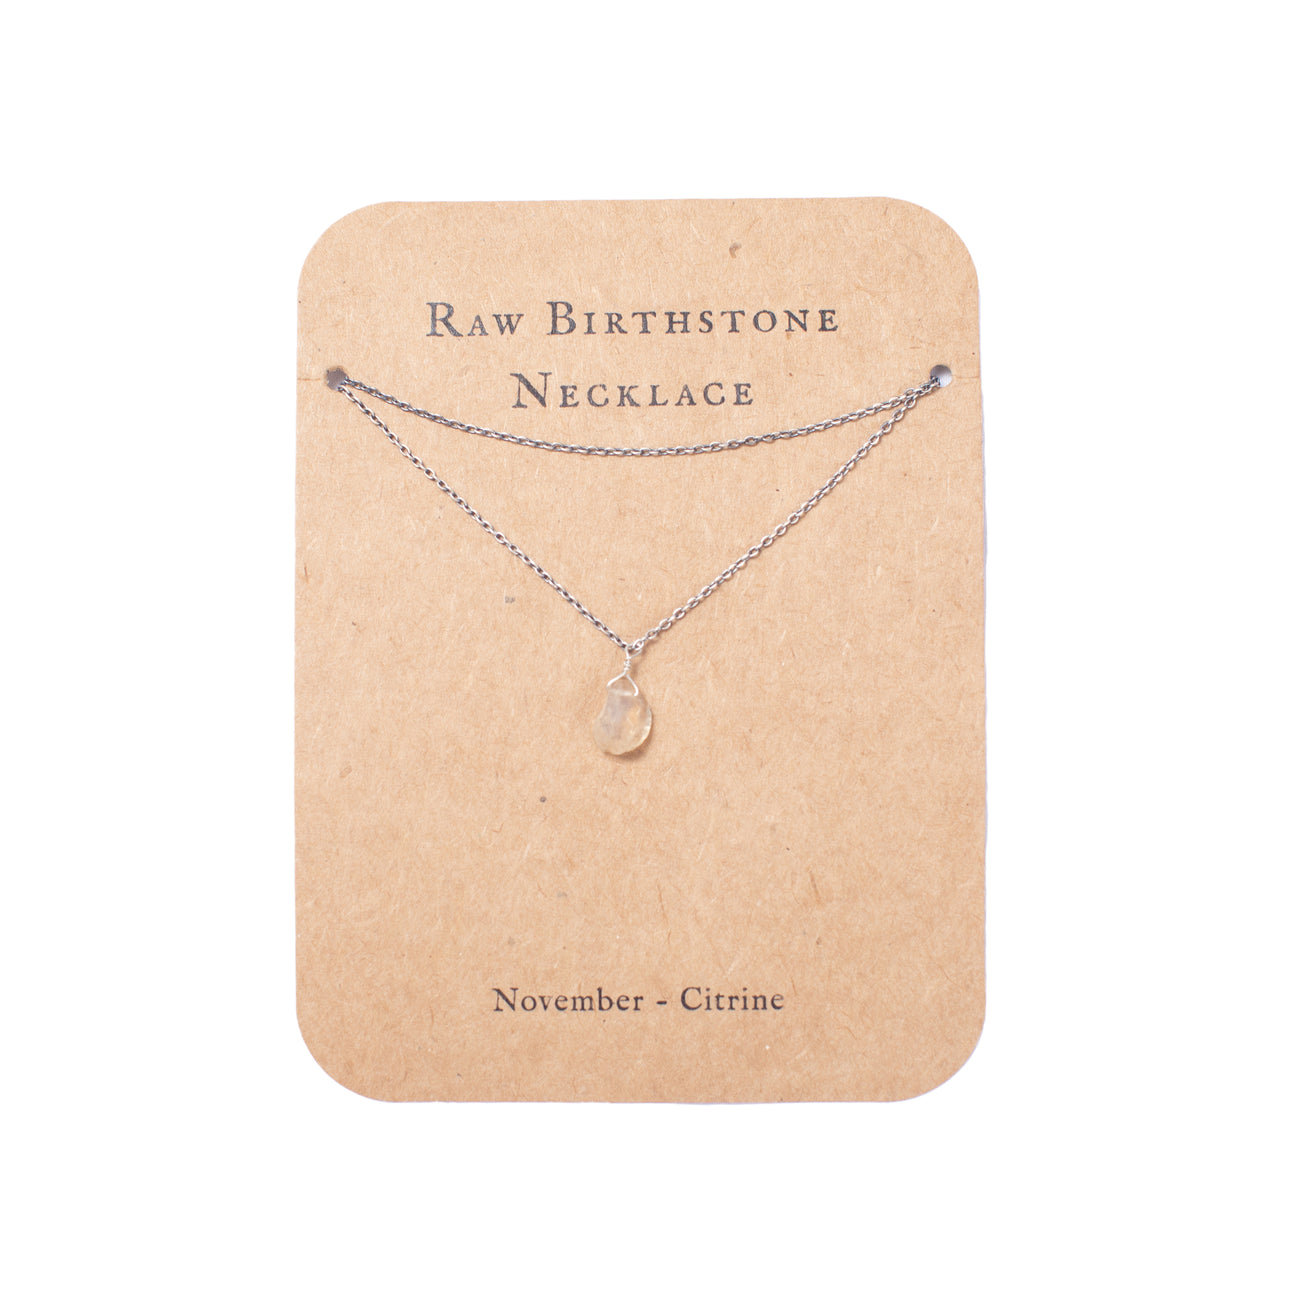 Raw Birthstone Necklaces in Sterling Silver